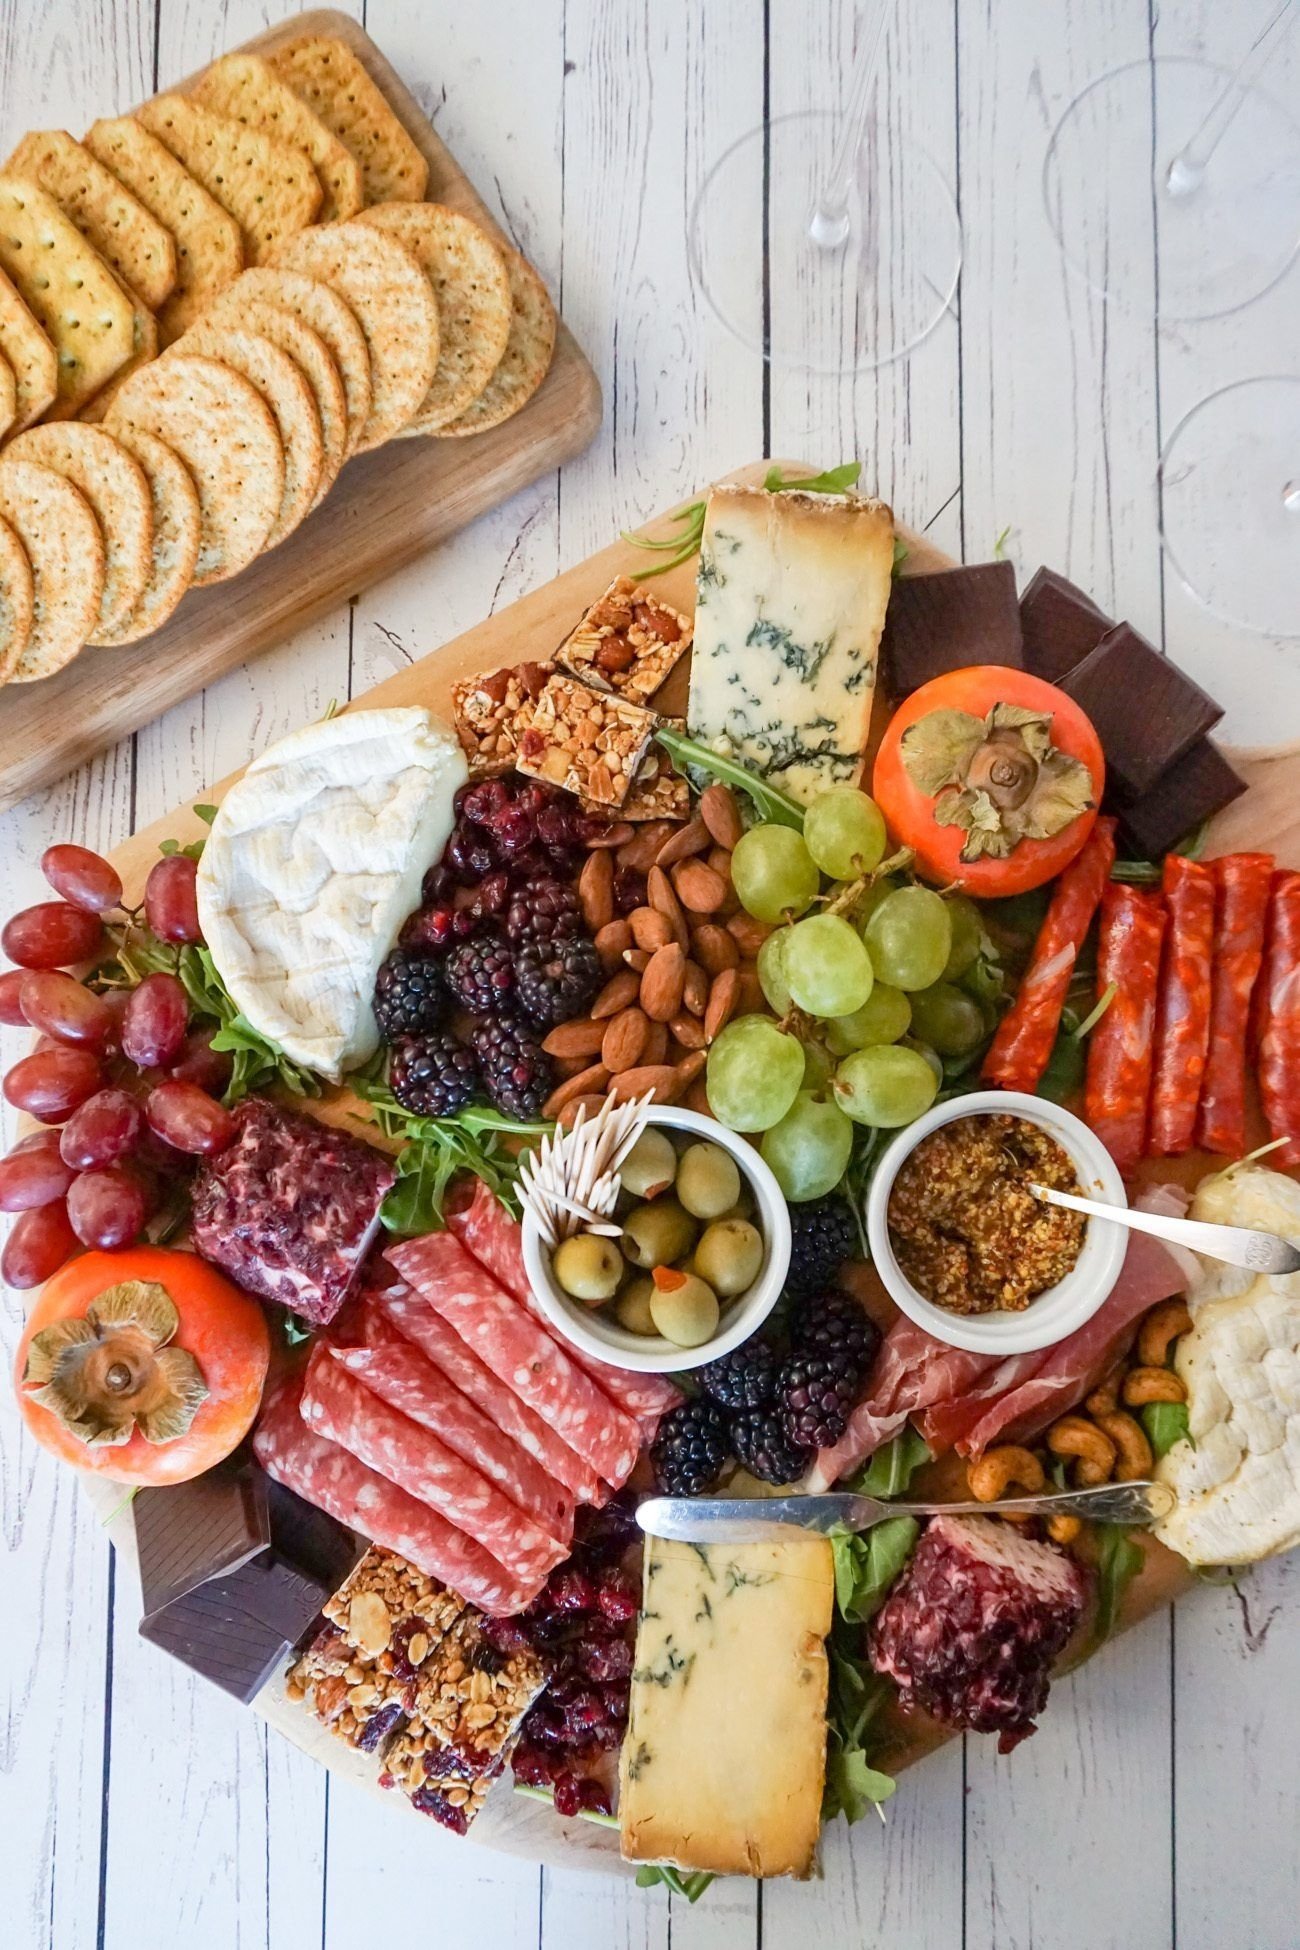 10 Unique Meat And Cheese Tray Ideas tips for making the ultimate charcuterie and cheese board 2023